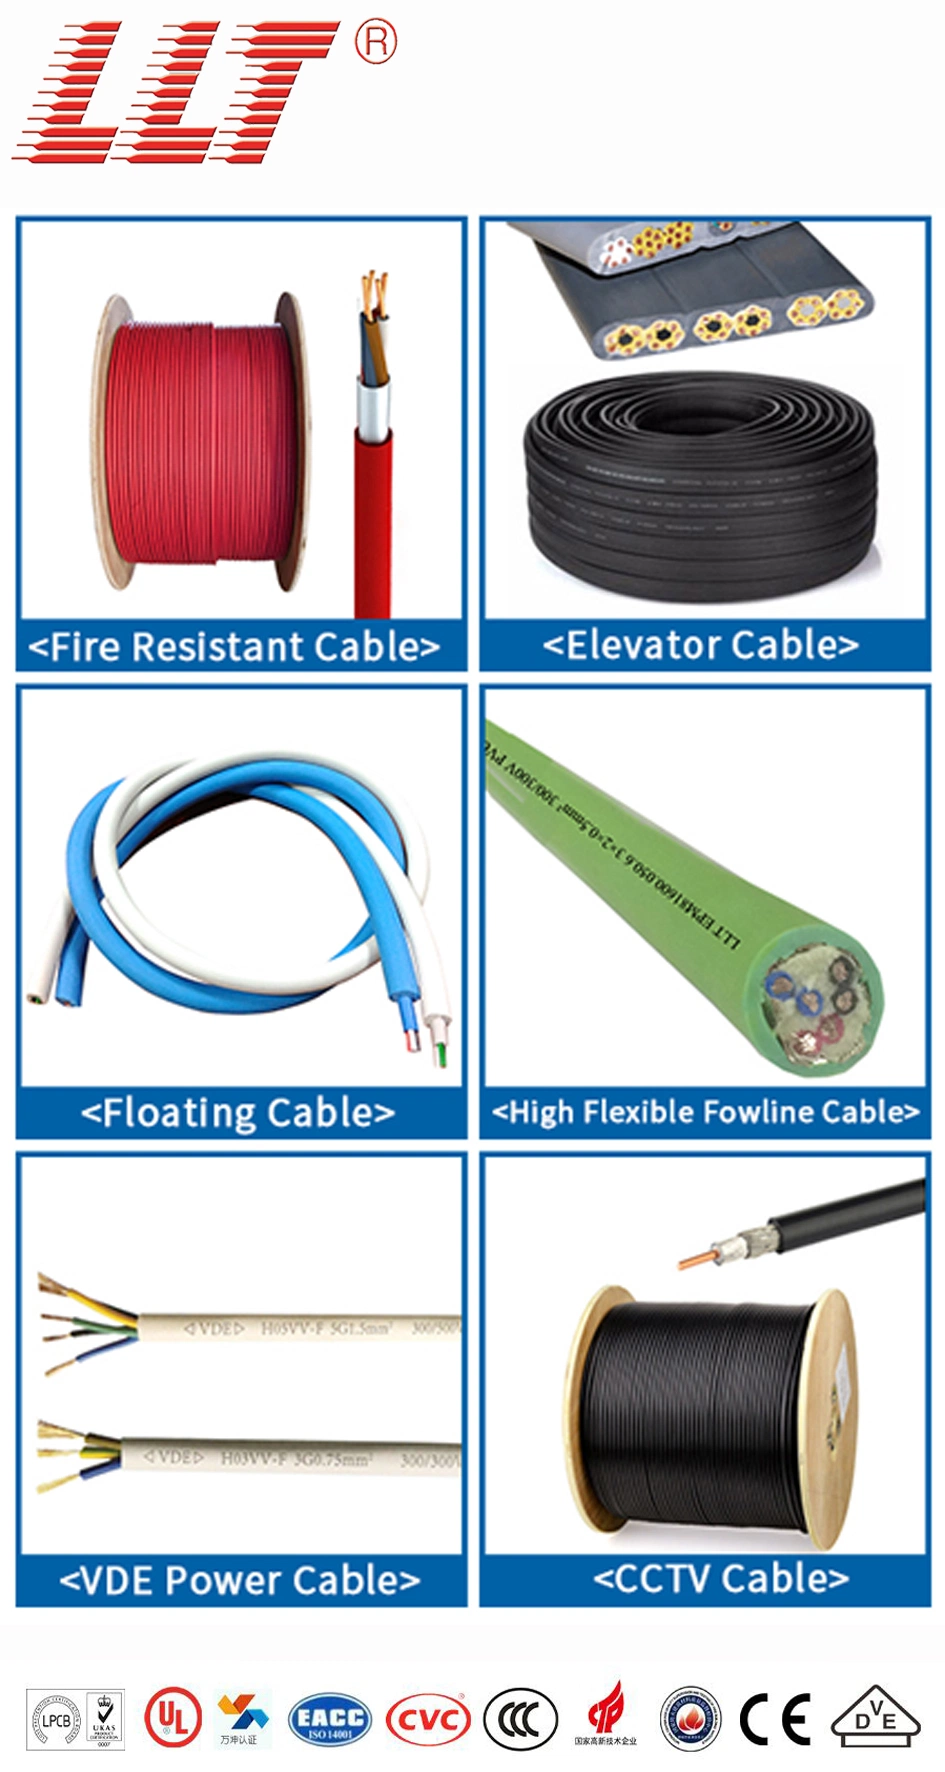 Made in China Shielded 2c 16AWG UL Listed Fire Alarm Cable